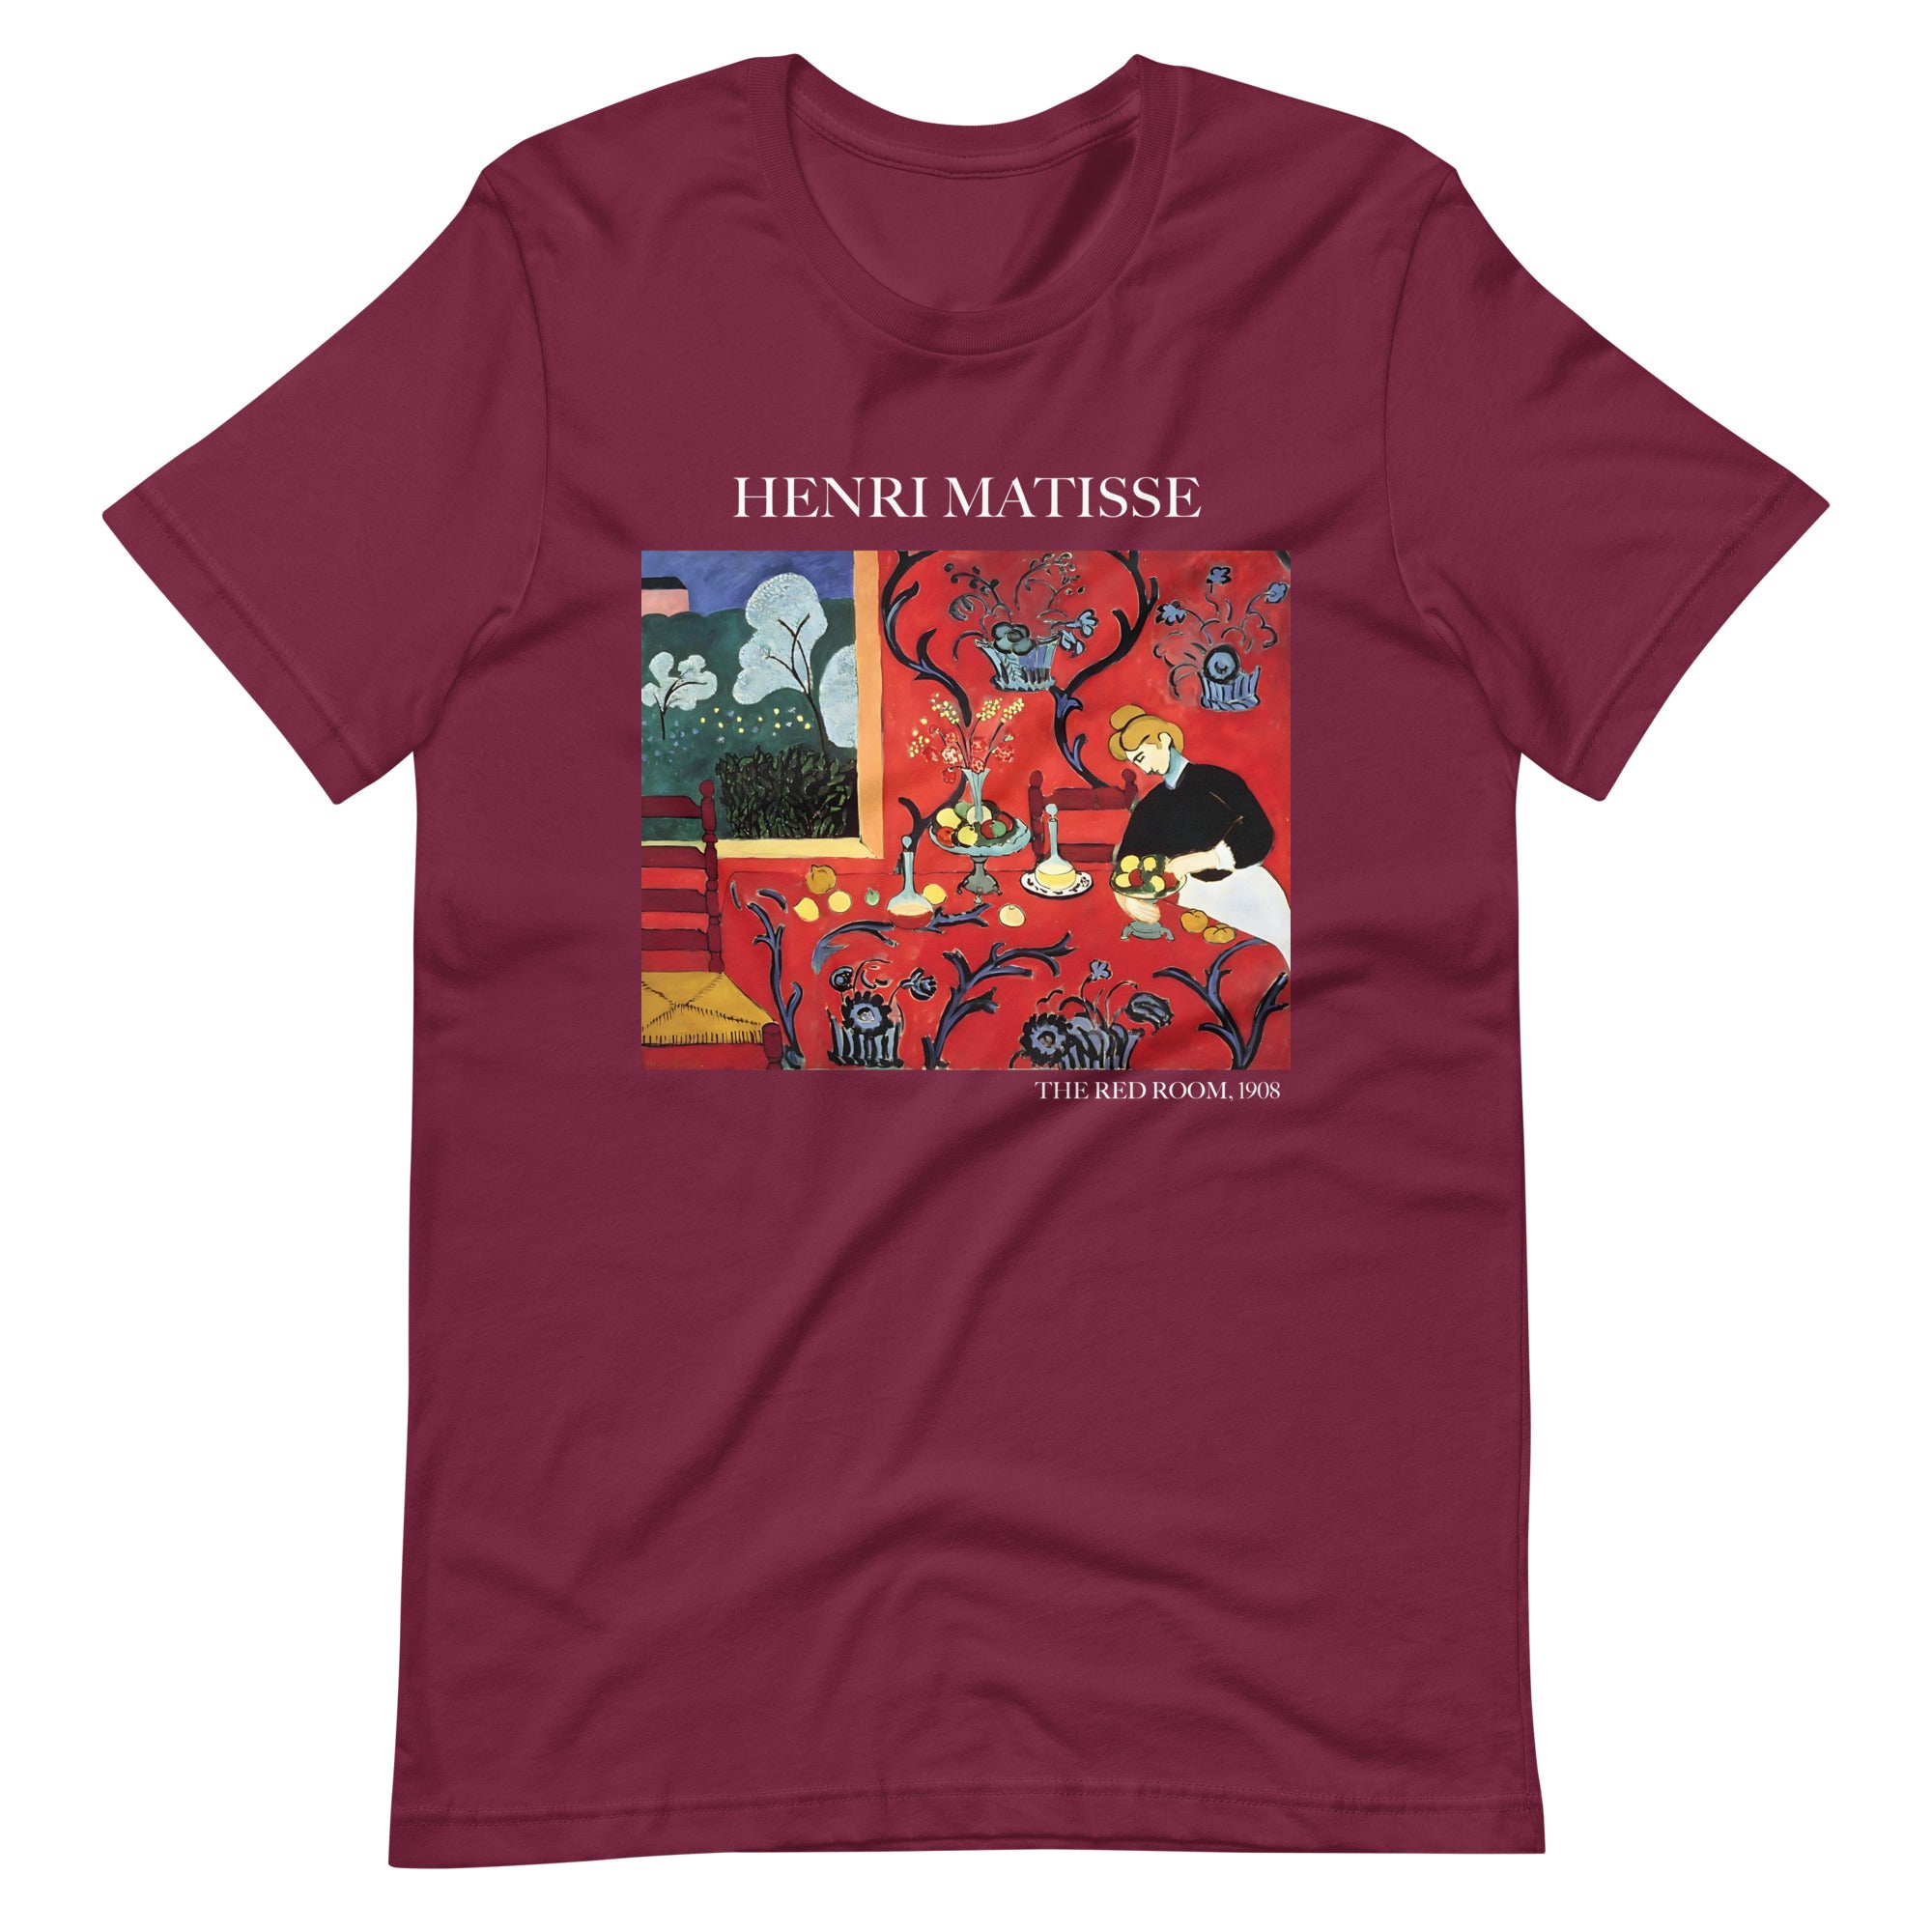 Henri Matisse 'The Red Room' Famous Painting T-Shirt | Unisex Classic Art Tee